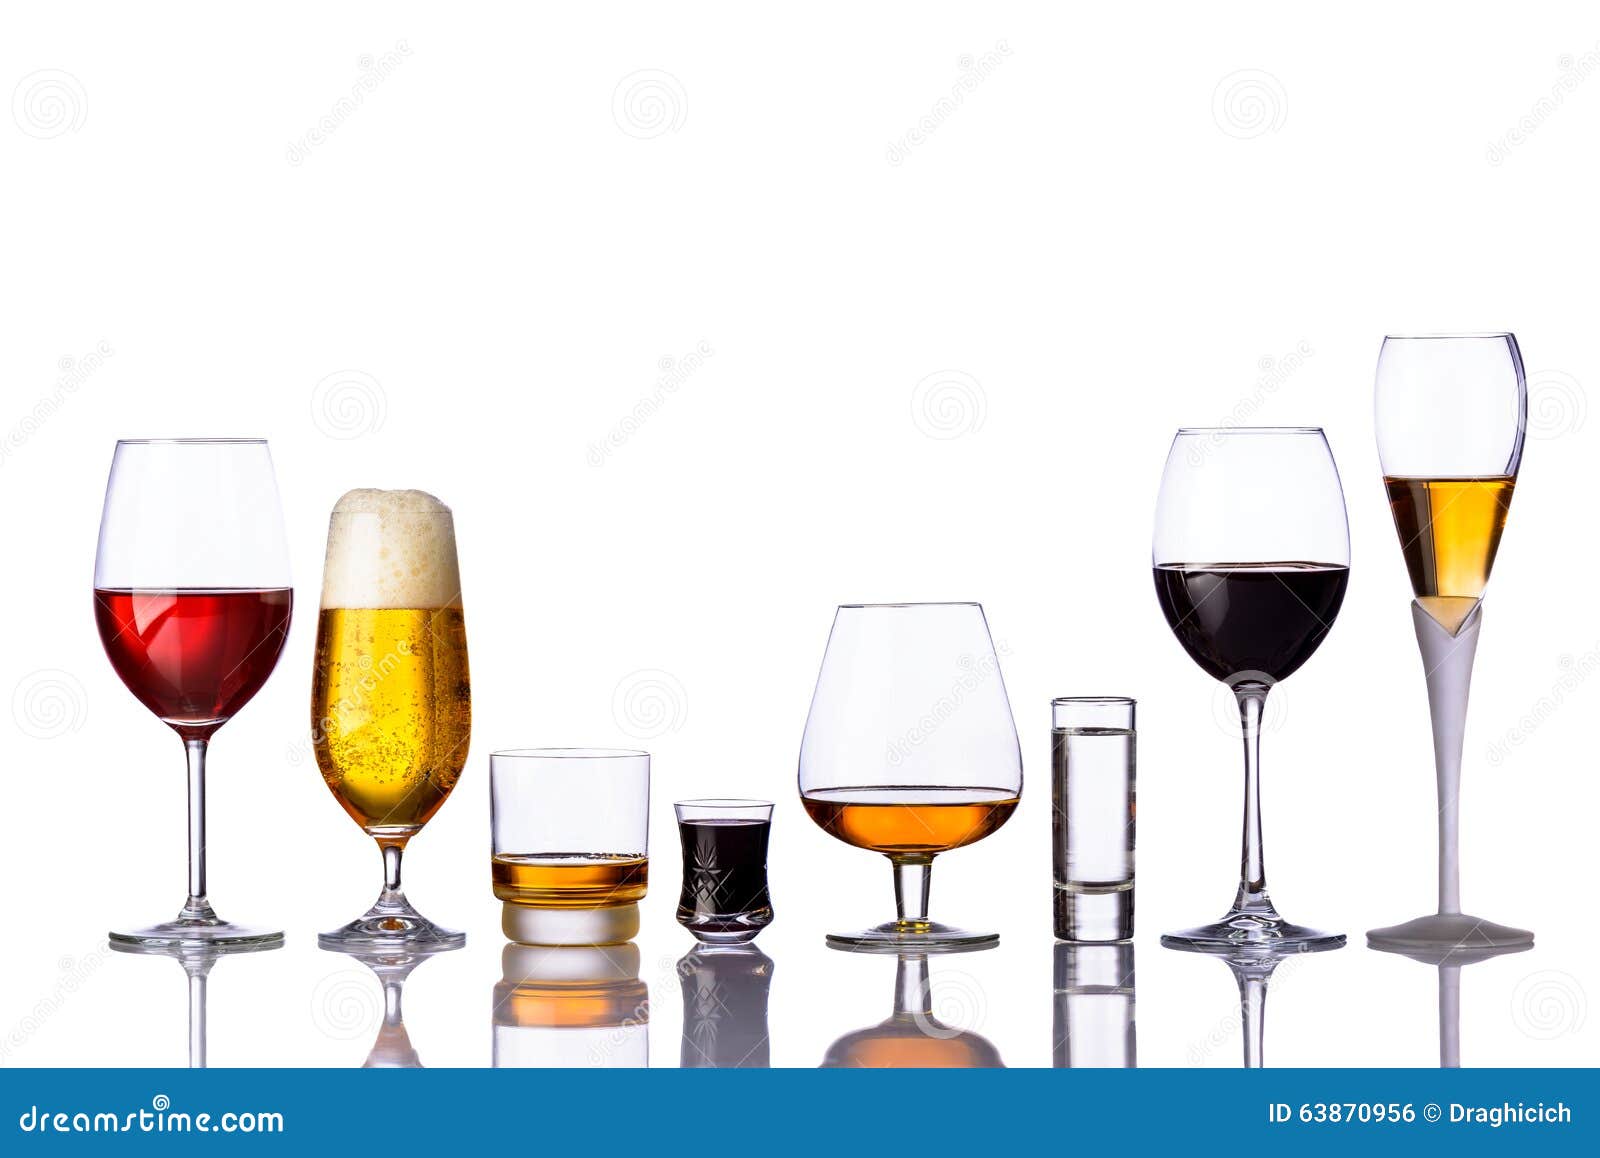 glasses of alcoholic drinks